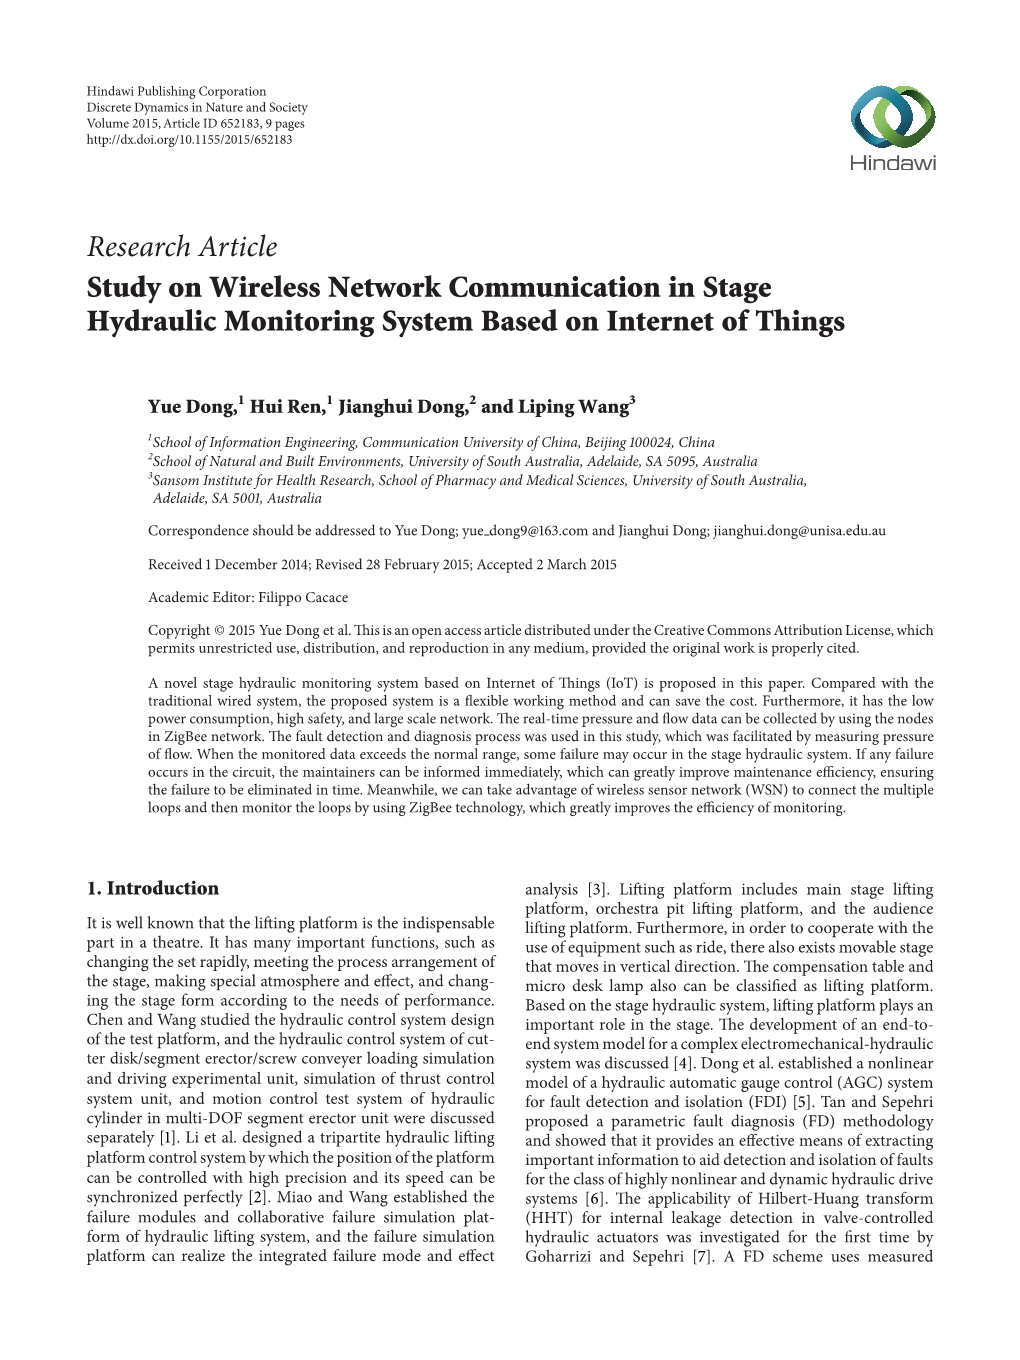 Study on Wireless Network Communication in Stage Hydraulic Monitoring System Based on Internet of Things